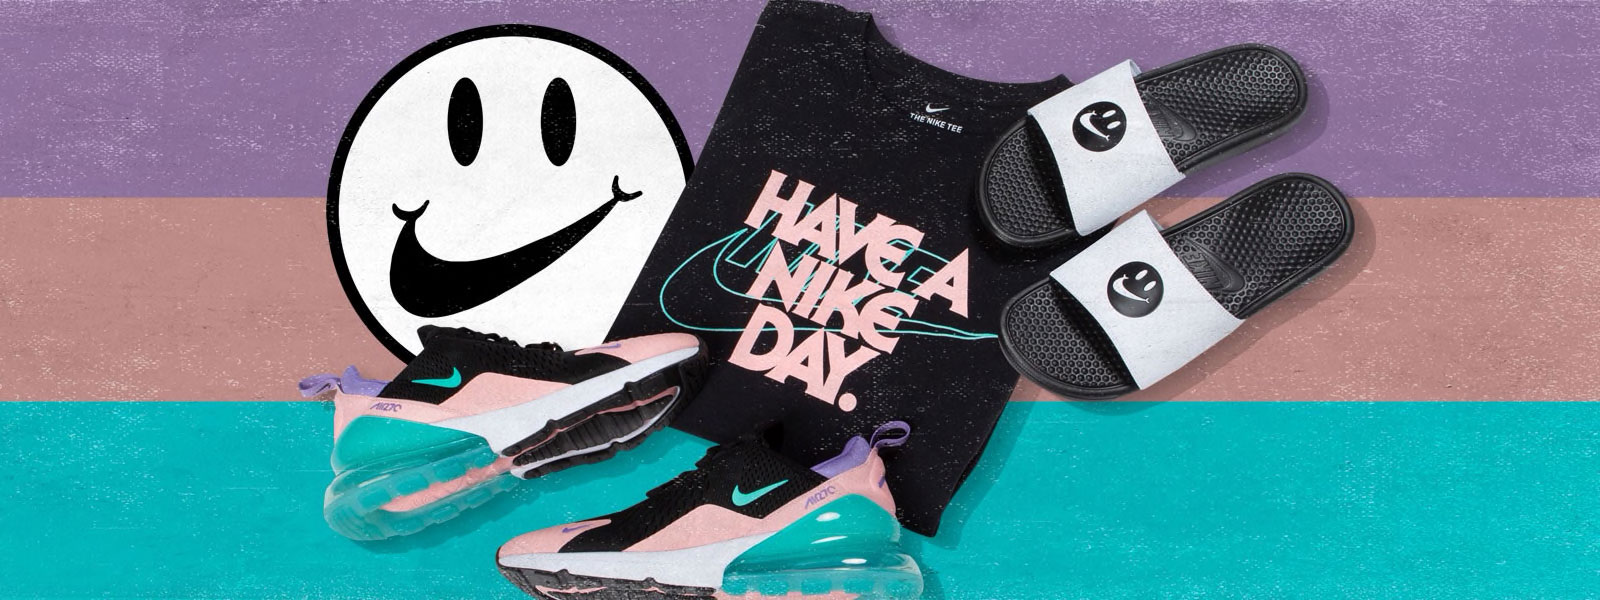 Have A Nike Day Tees Shoes and Slides 